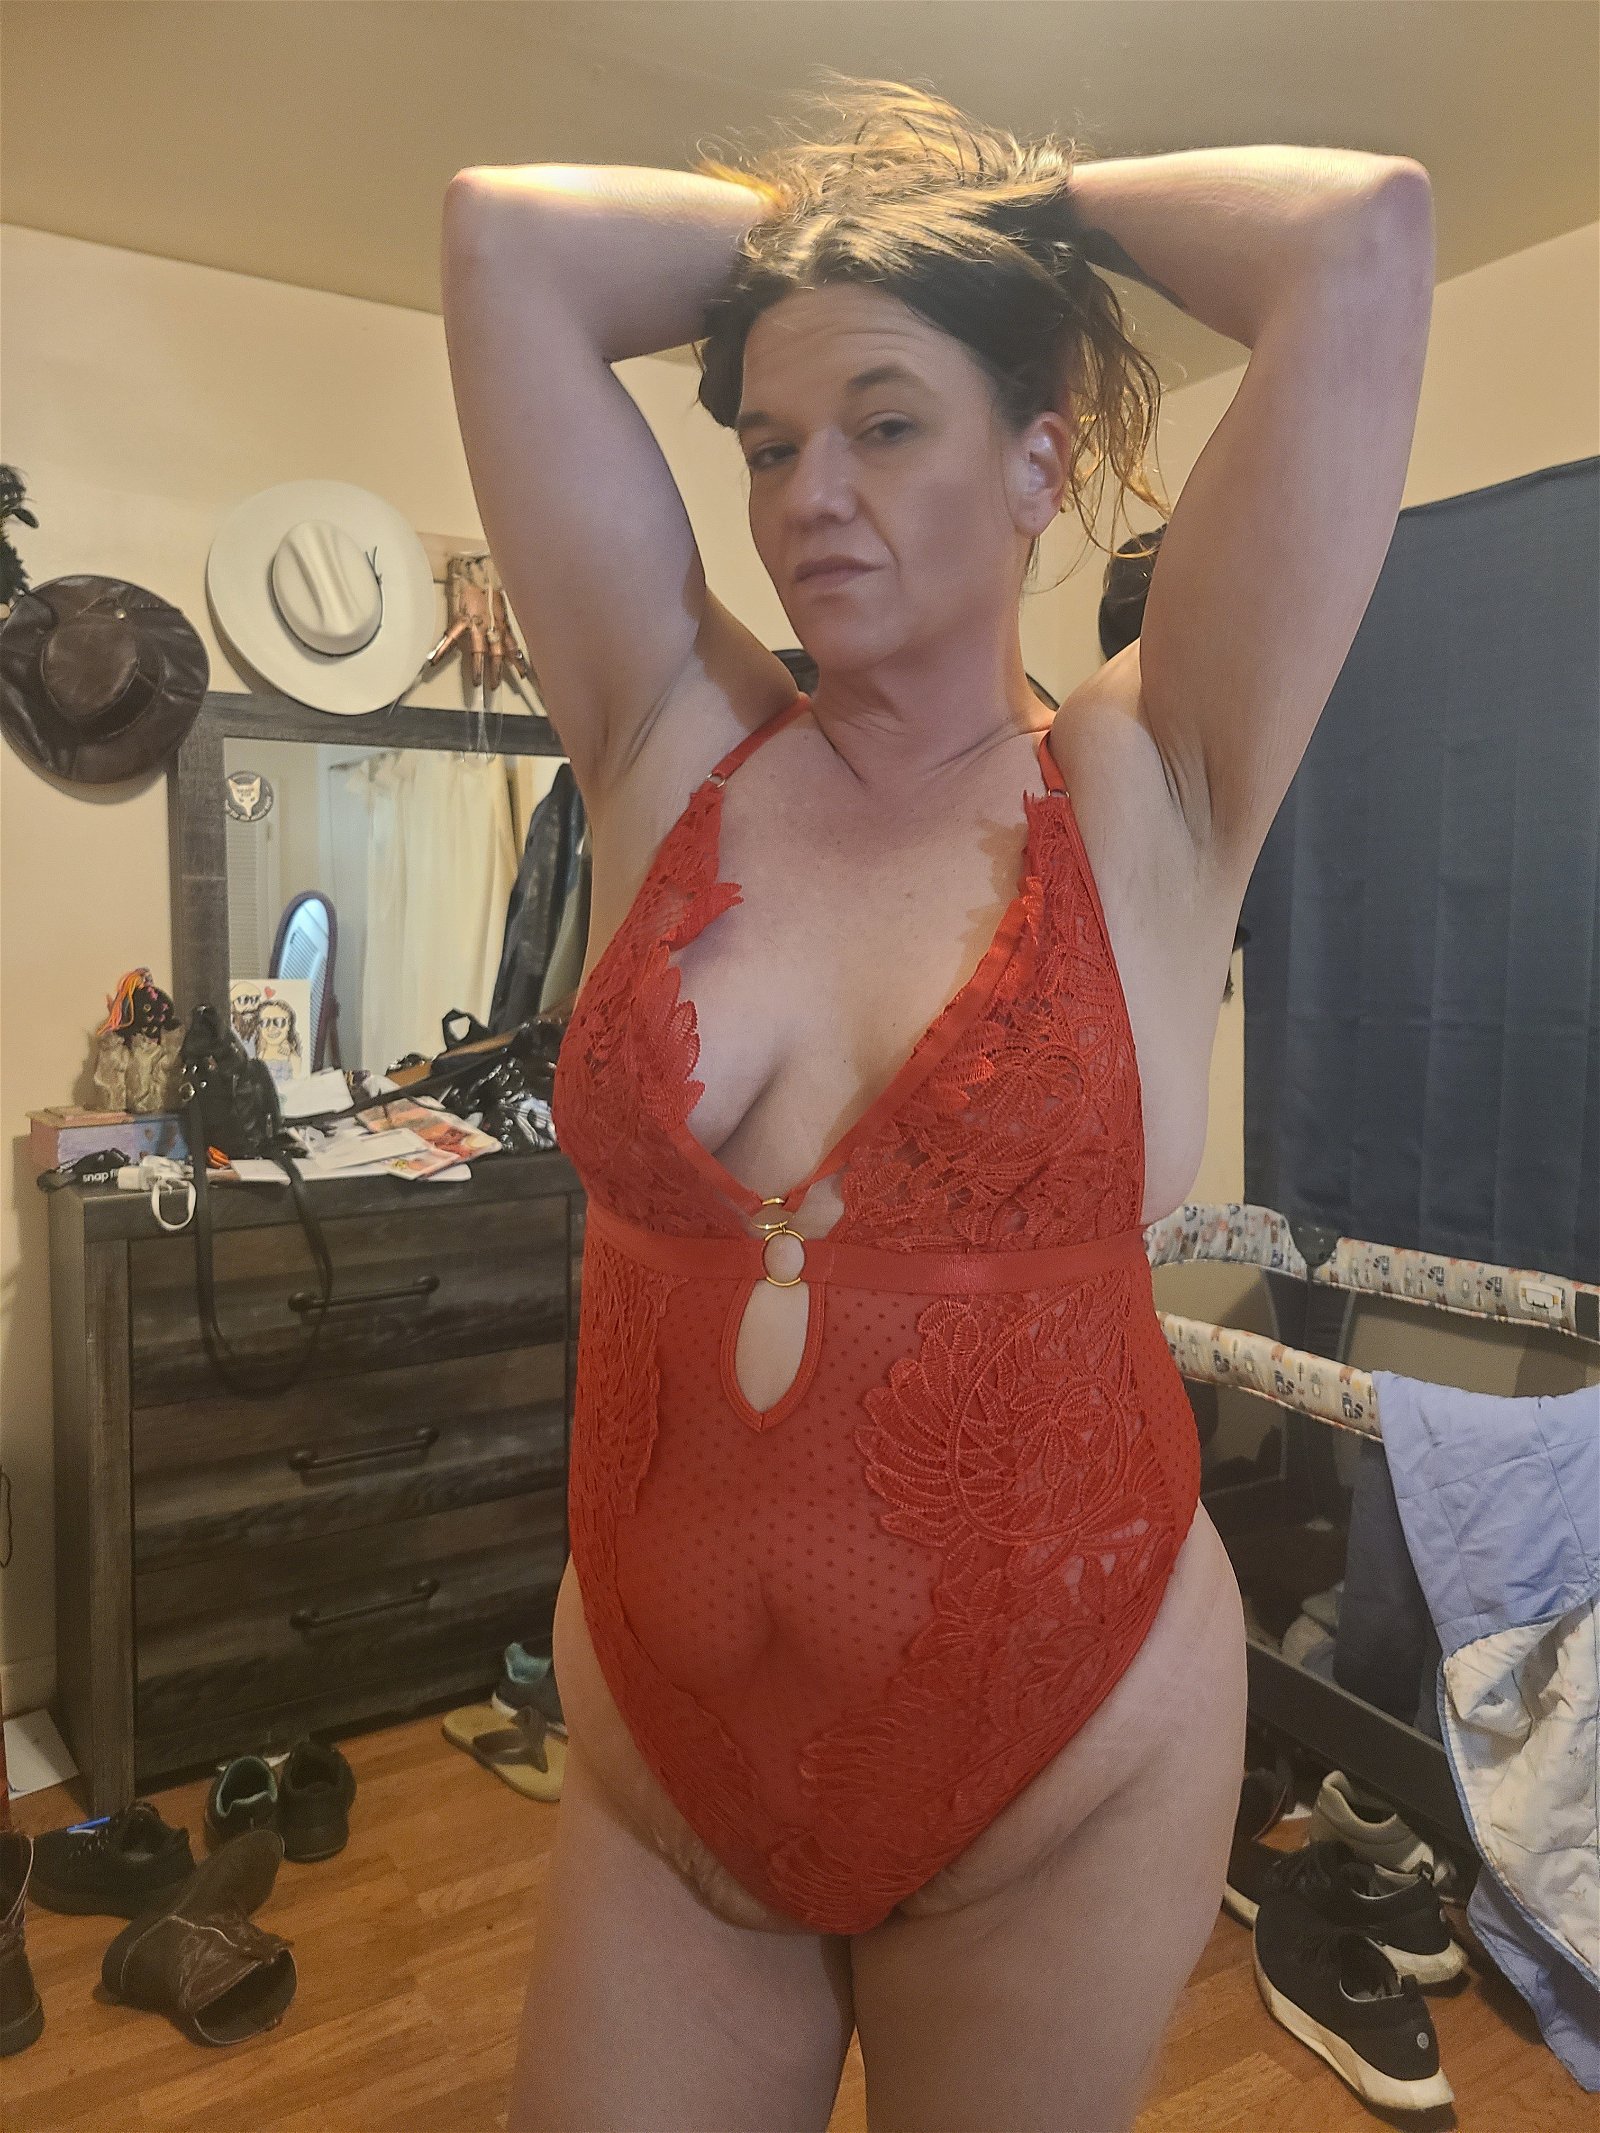 Photo by ExhibCouplePlayTime with the username @ExhibCouplePlayTime, who is a verified user,  February 16, 2024 at 12:49 AM. The post is about the topic MILF and the text says 'New red lingerie, hubby liked it a lot, he came so hard inside me while i rode his cock reverse cowgirl!'